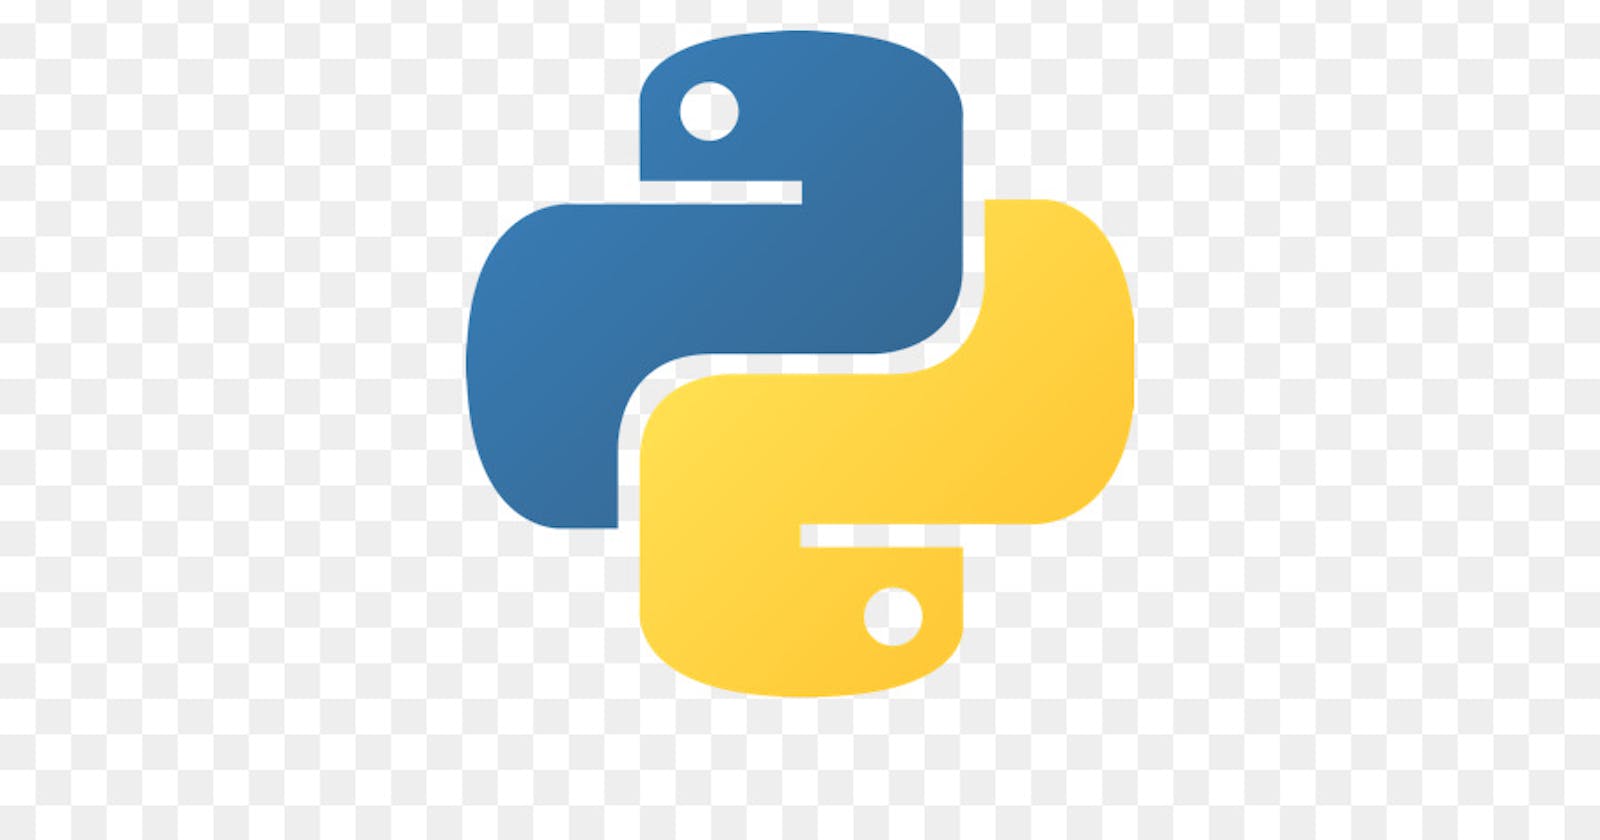 Complete Overview Of Encapsulation in Python